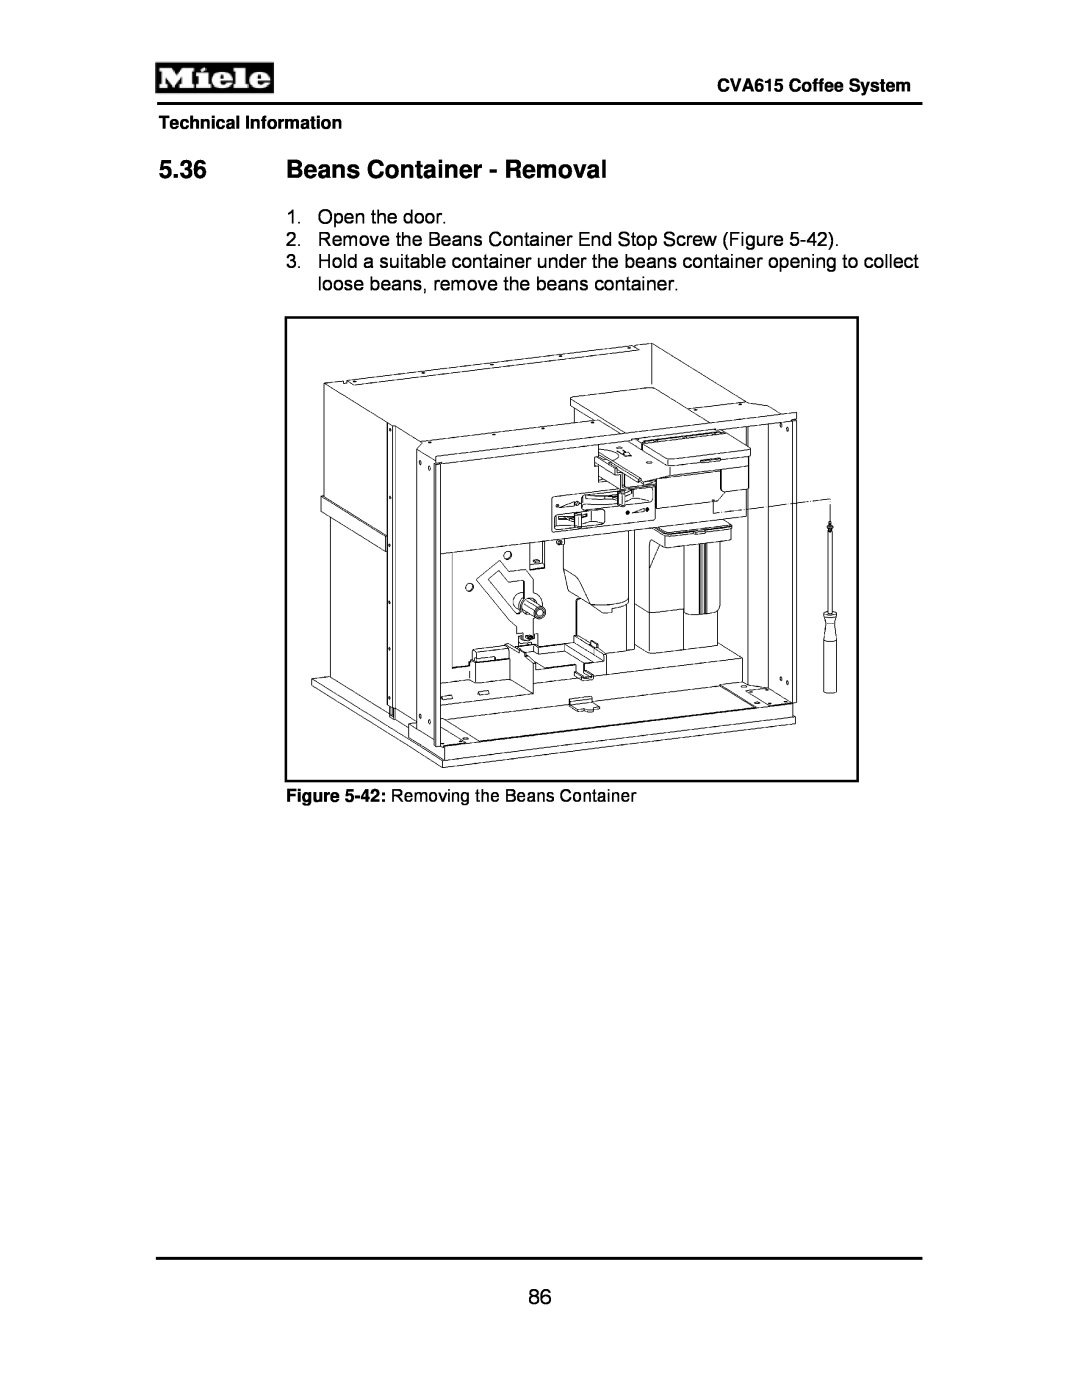 Miele manual 5.36Beans Container - Removal, Open the door, CVA615 Coffee System Technical Information 